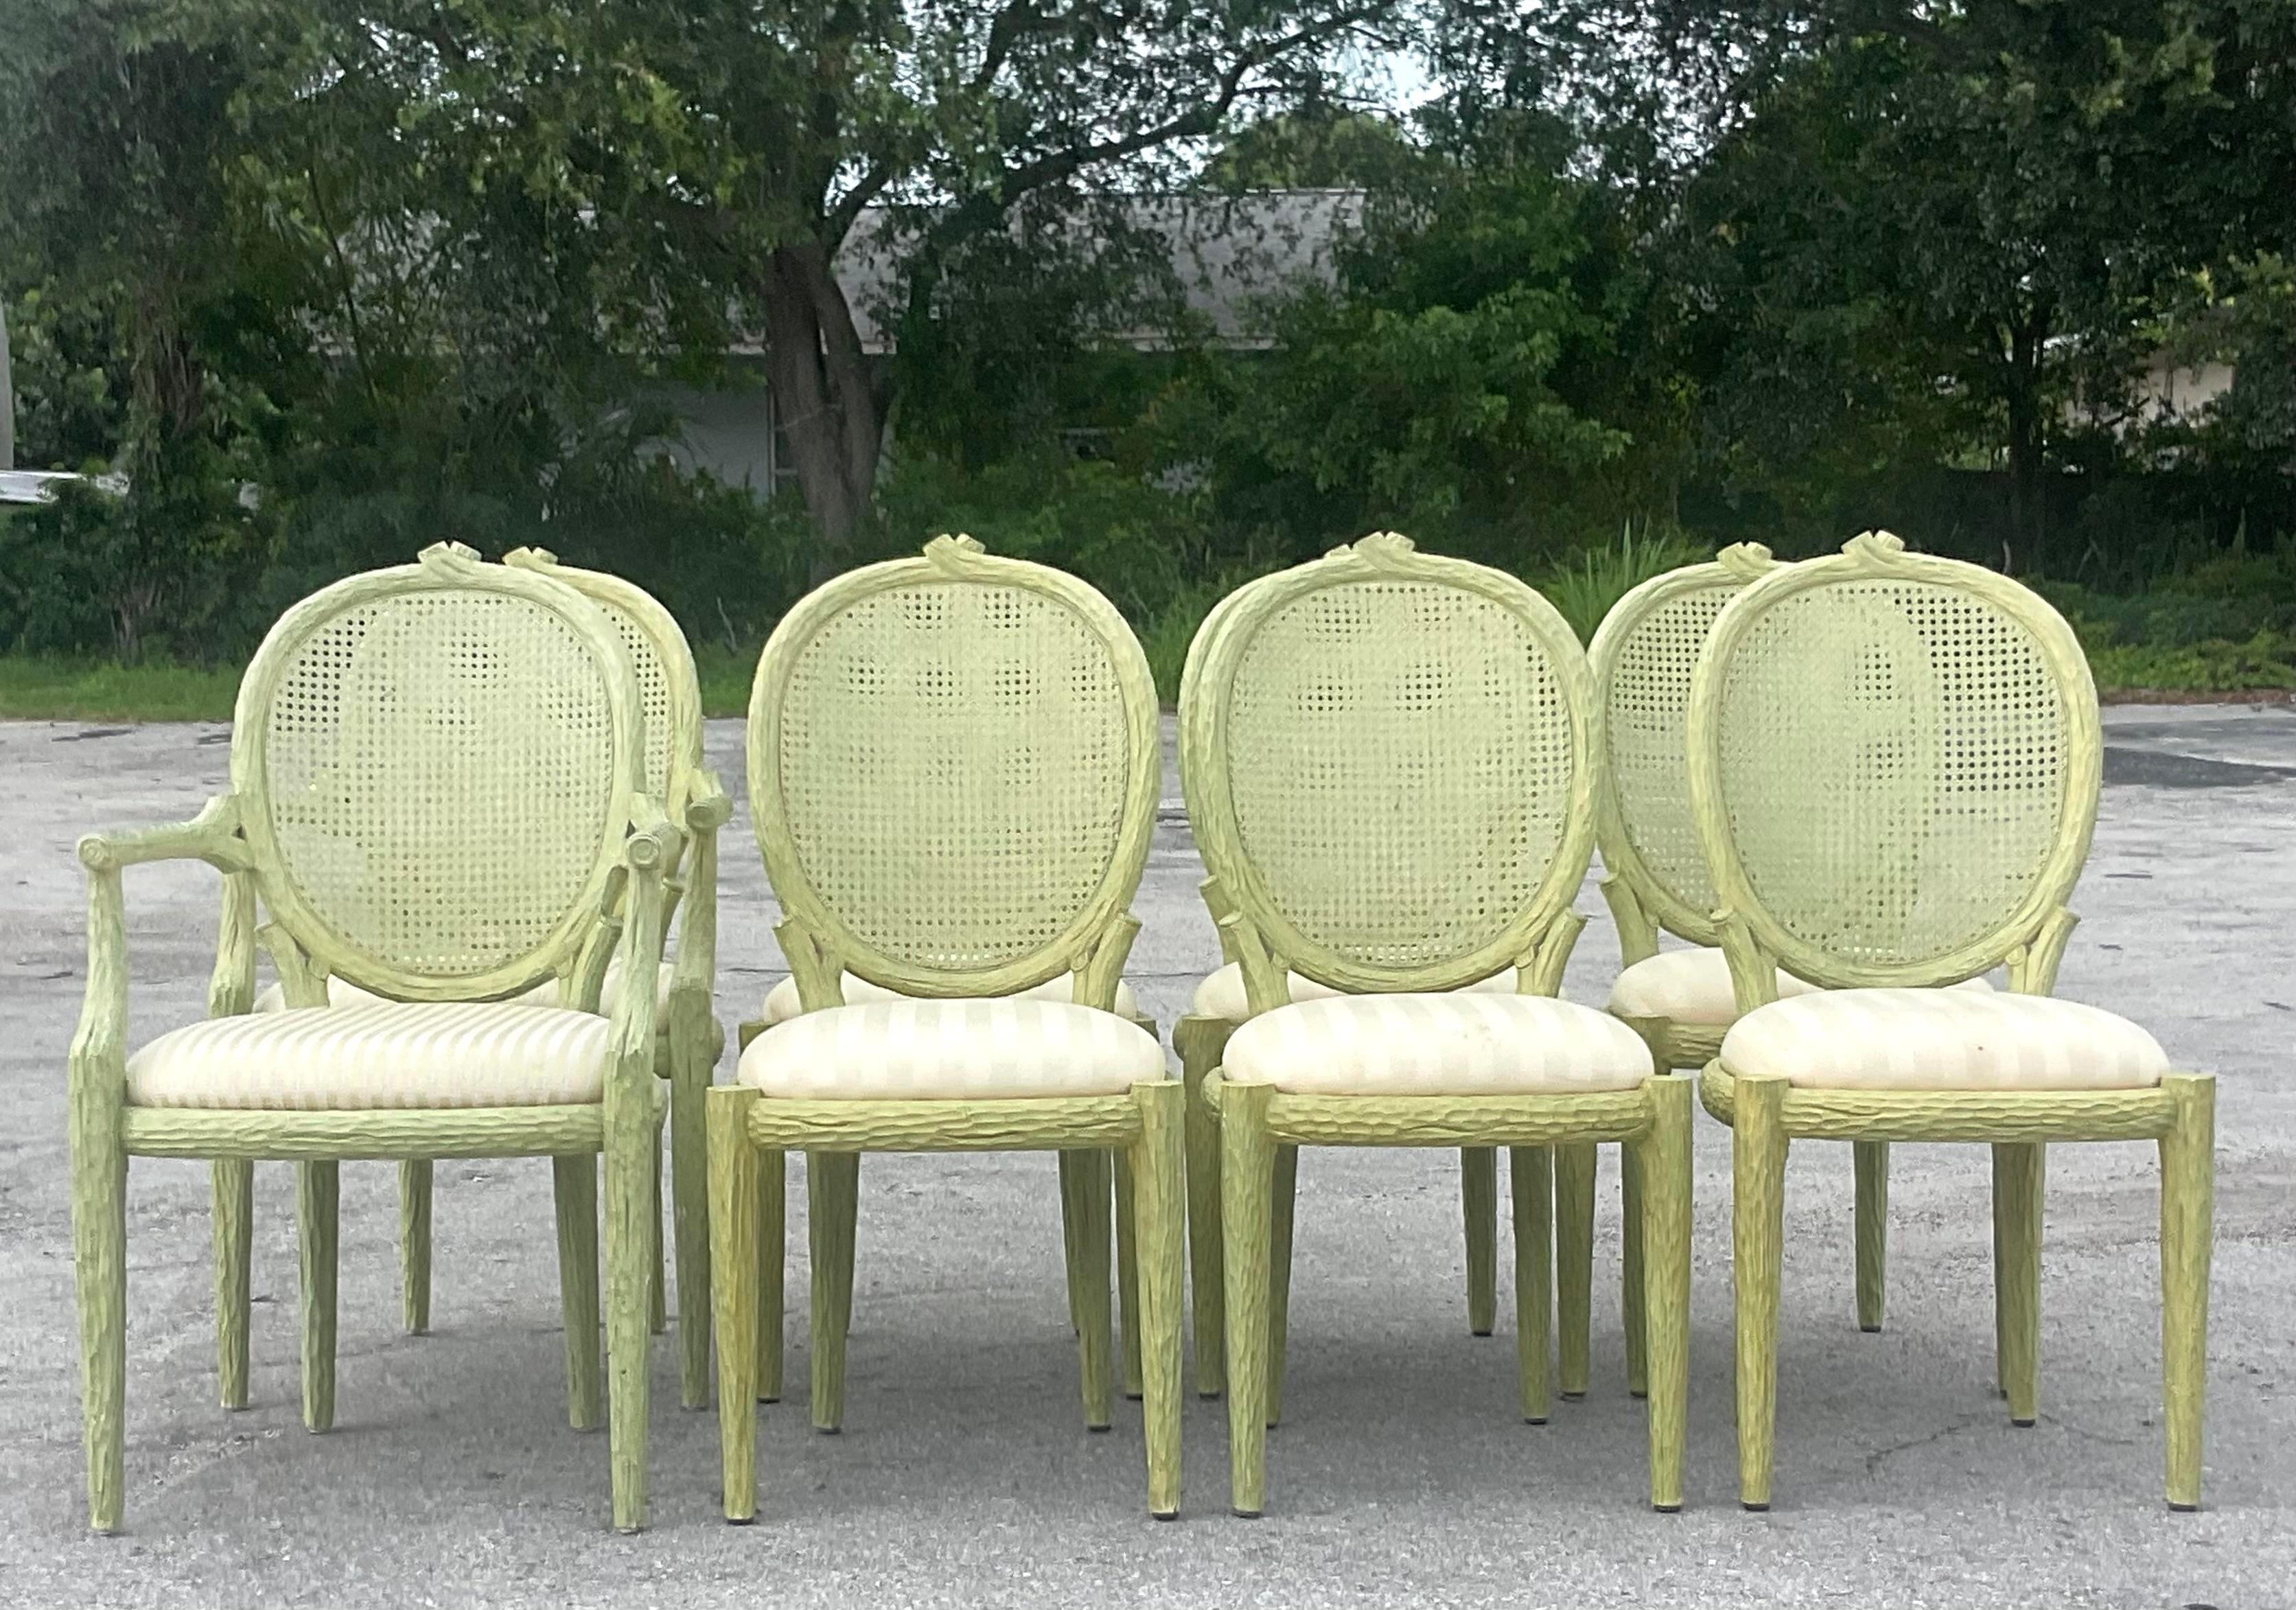 A fabulous set of 8 vintage Regency dining chairs. Stunning Faux Bois frames painted the most beautiful green. Inset cane backs and upholstered cushions. Two arms chairs and six sides. Acquired from a Palm Beach estate.

Arm chairs 23x18x39